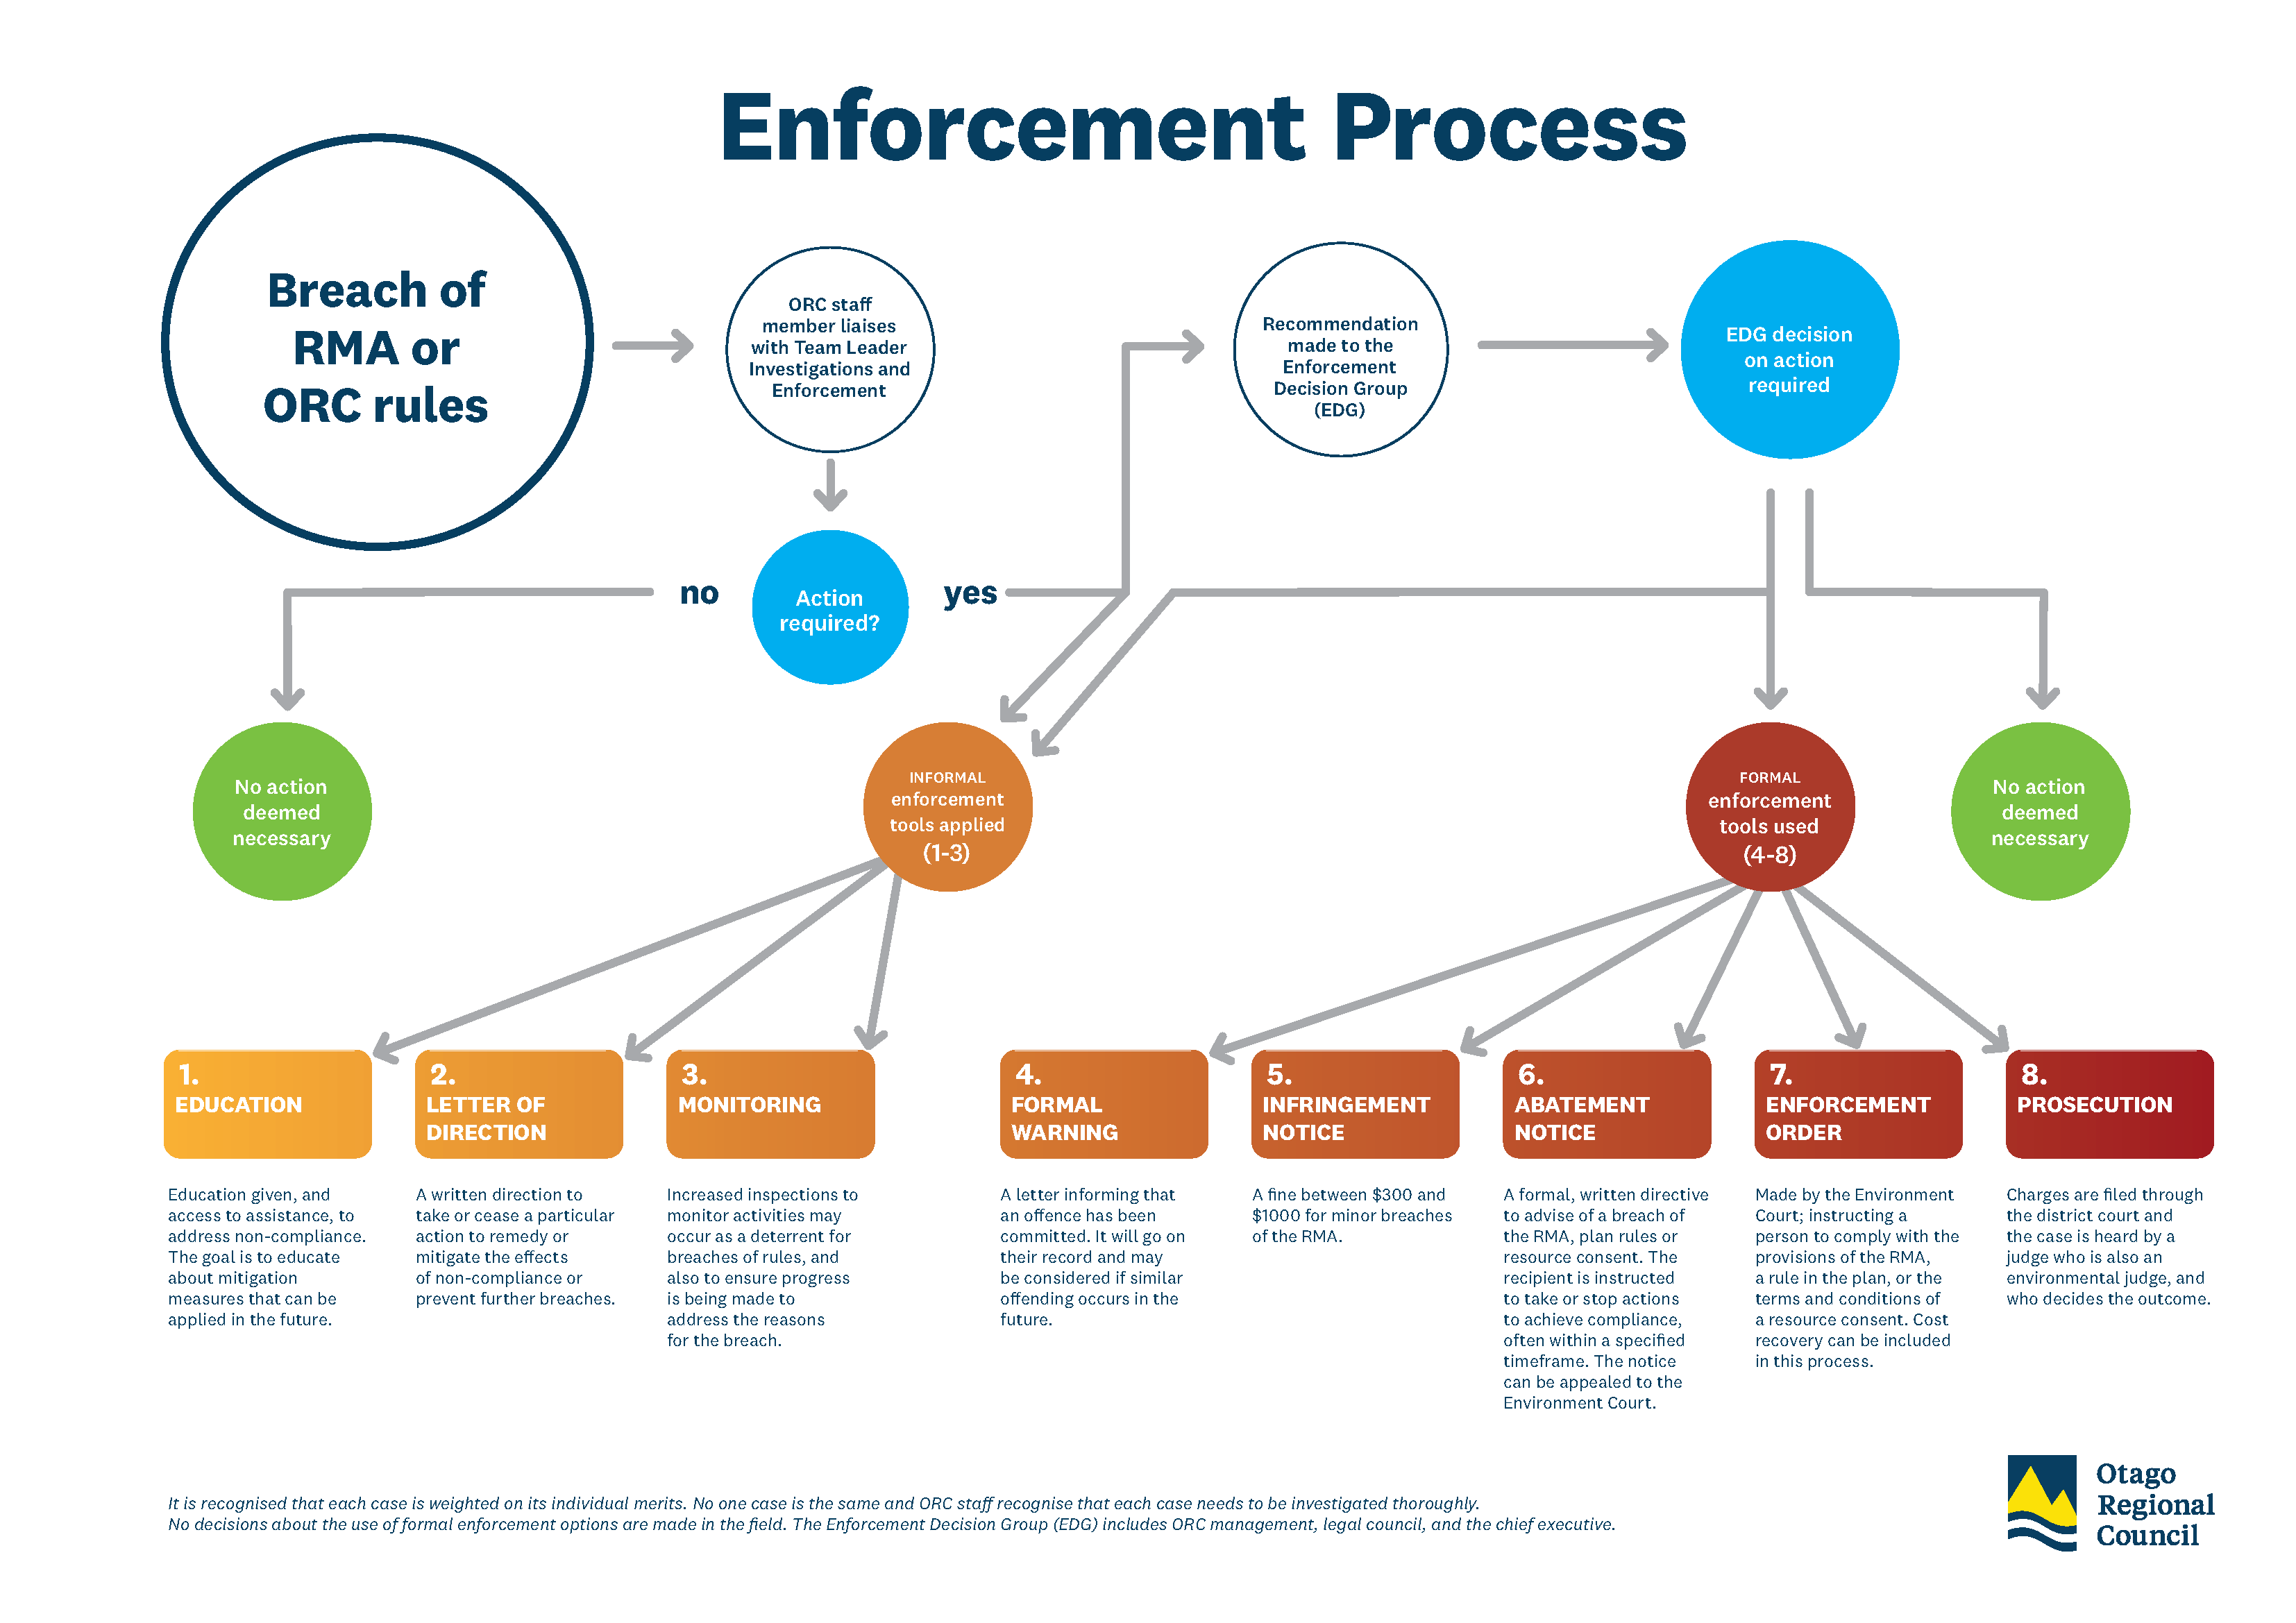 Chart showing actions ORC compliance may take when a breach of rules is reported